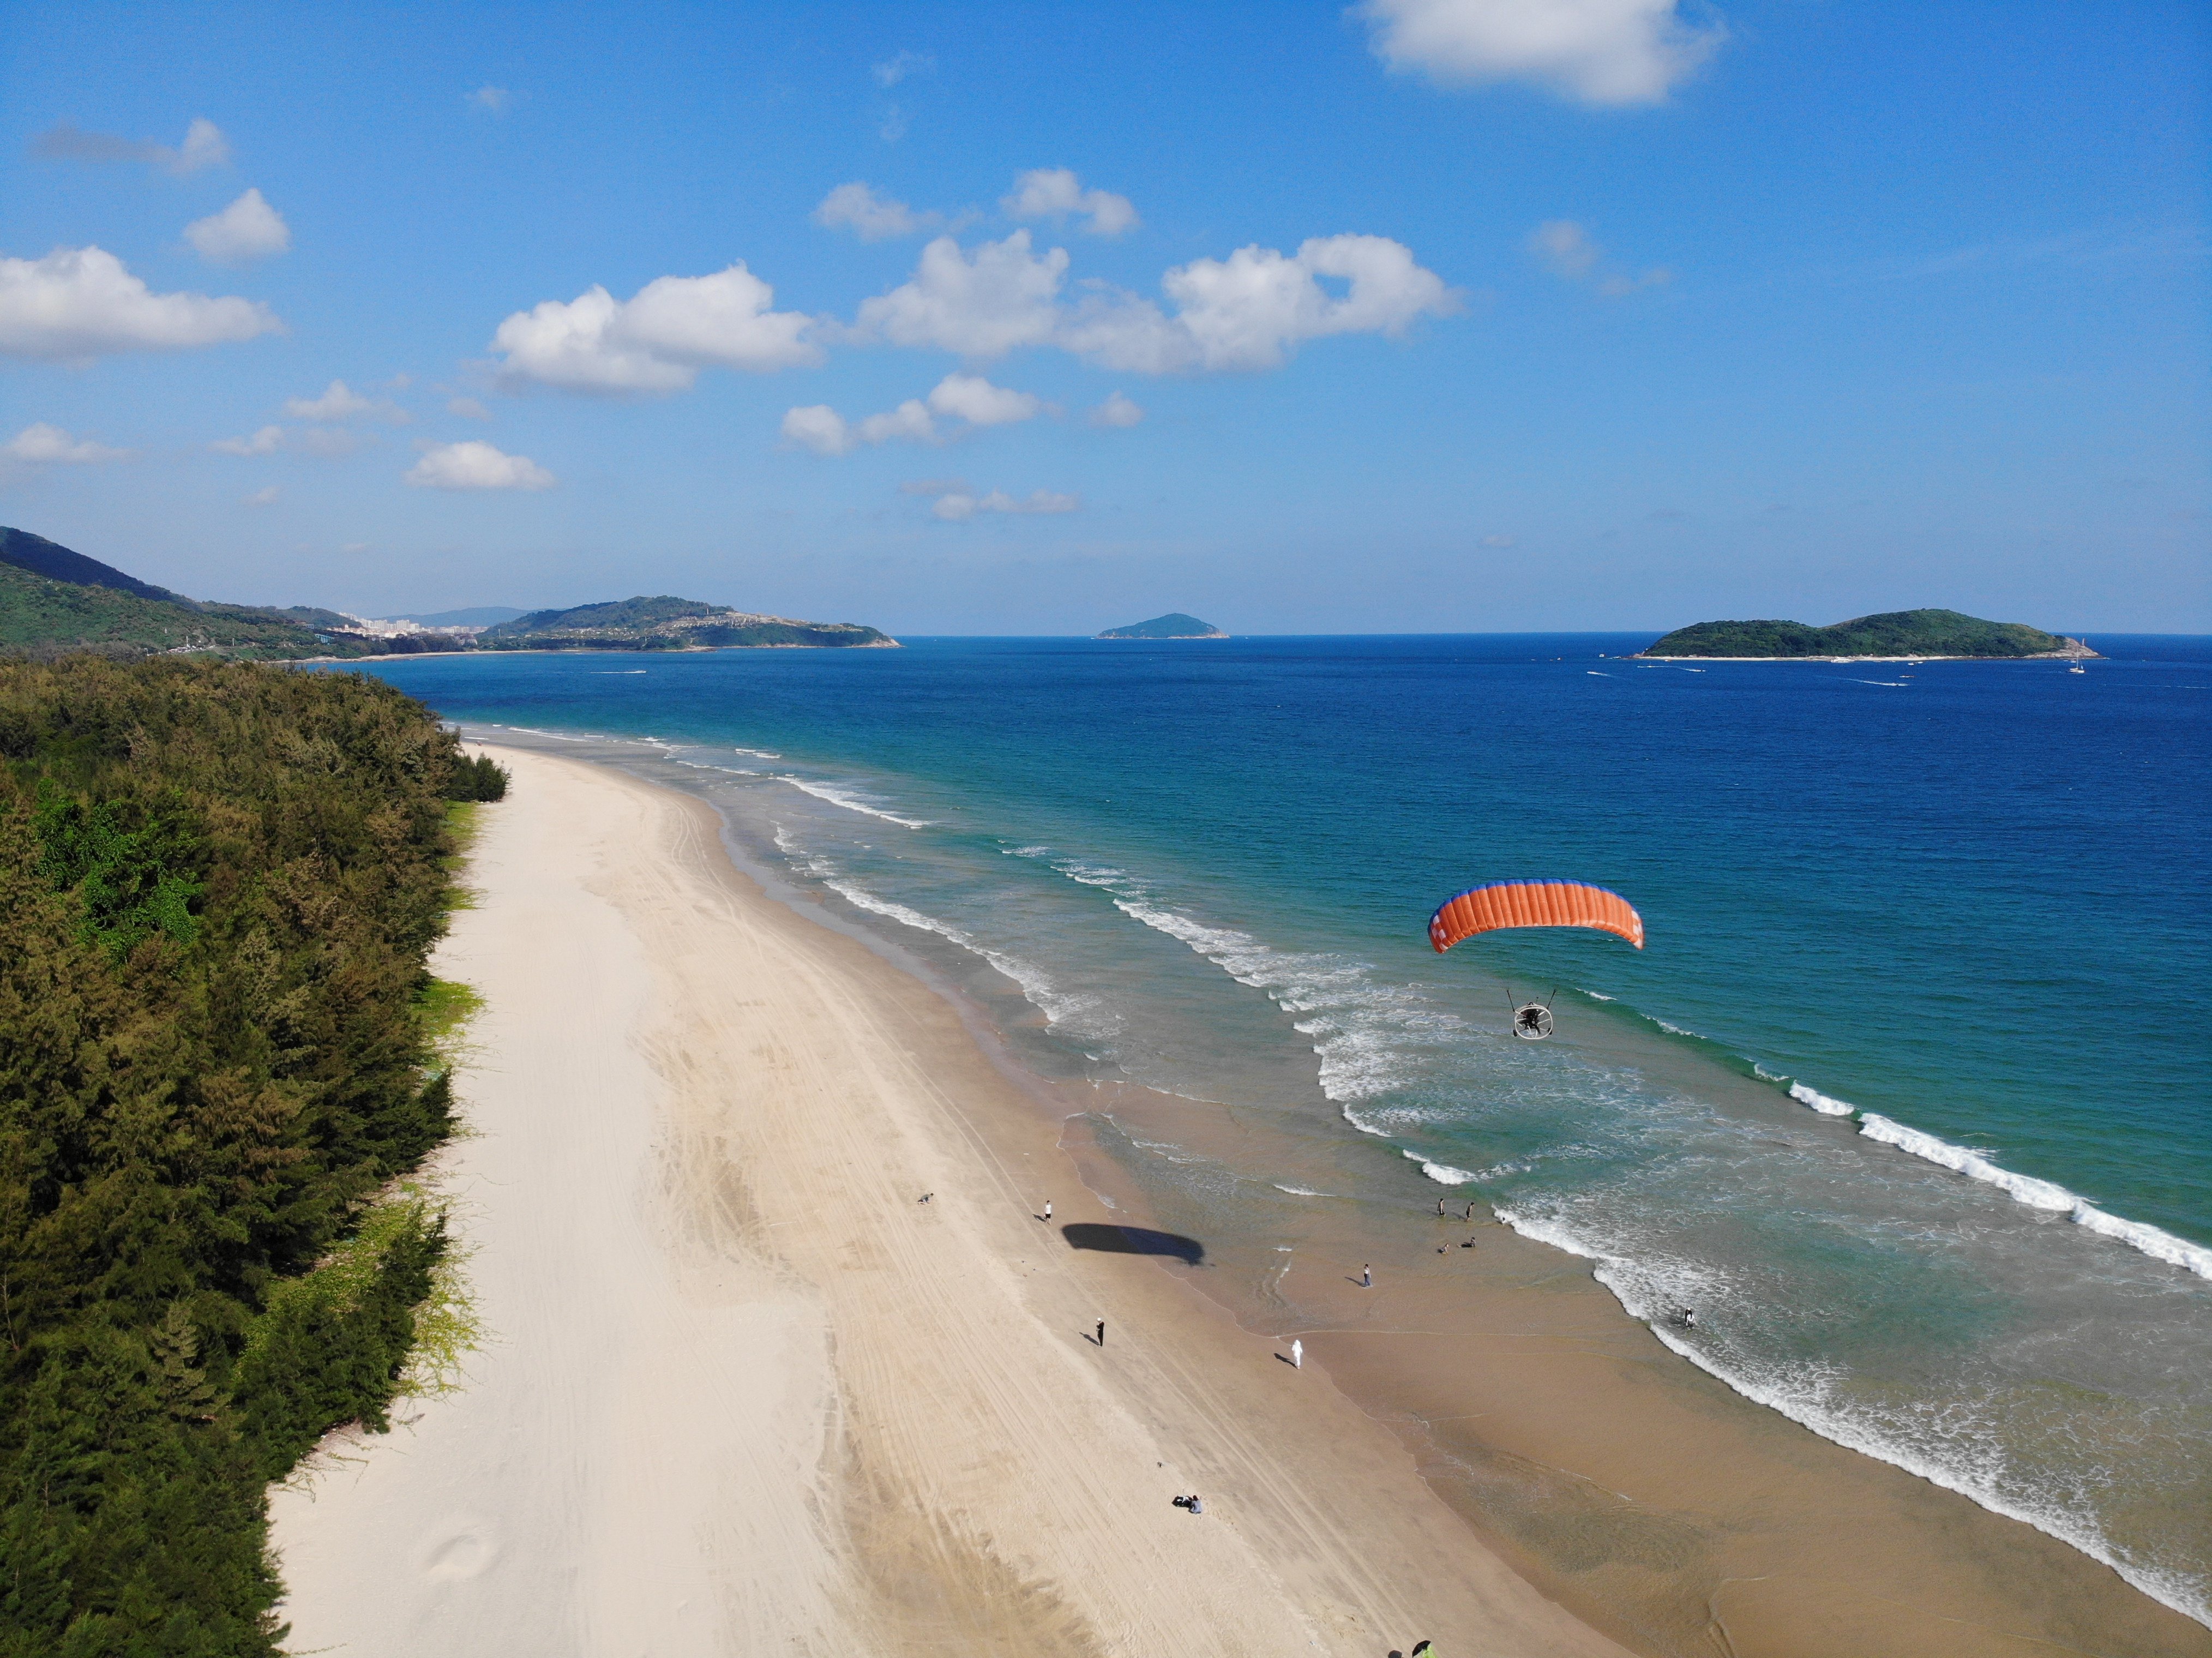 A paraglider hovers over a beach in Shimei Bay, Hainan. The island’s “low-altitude economy” is flourishing. Photo: Getty Images